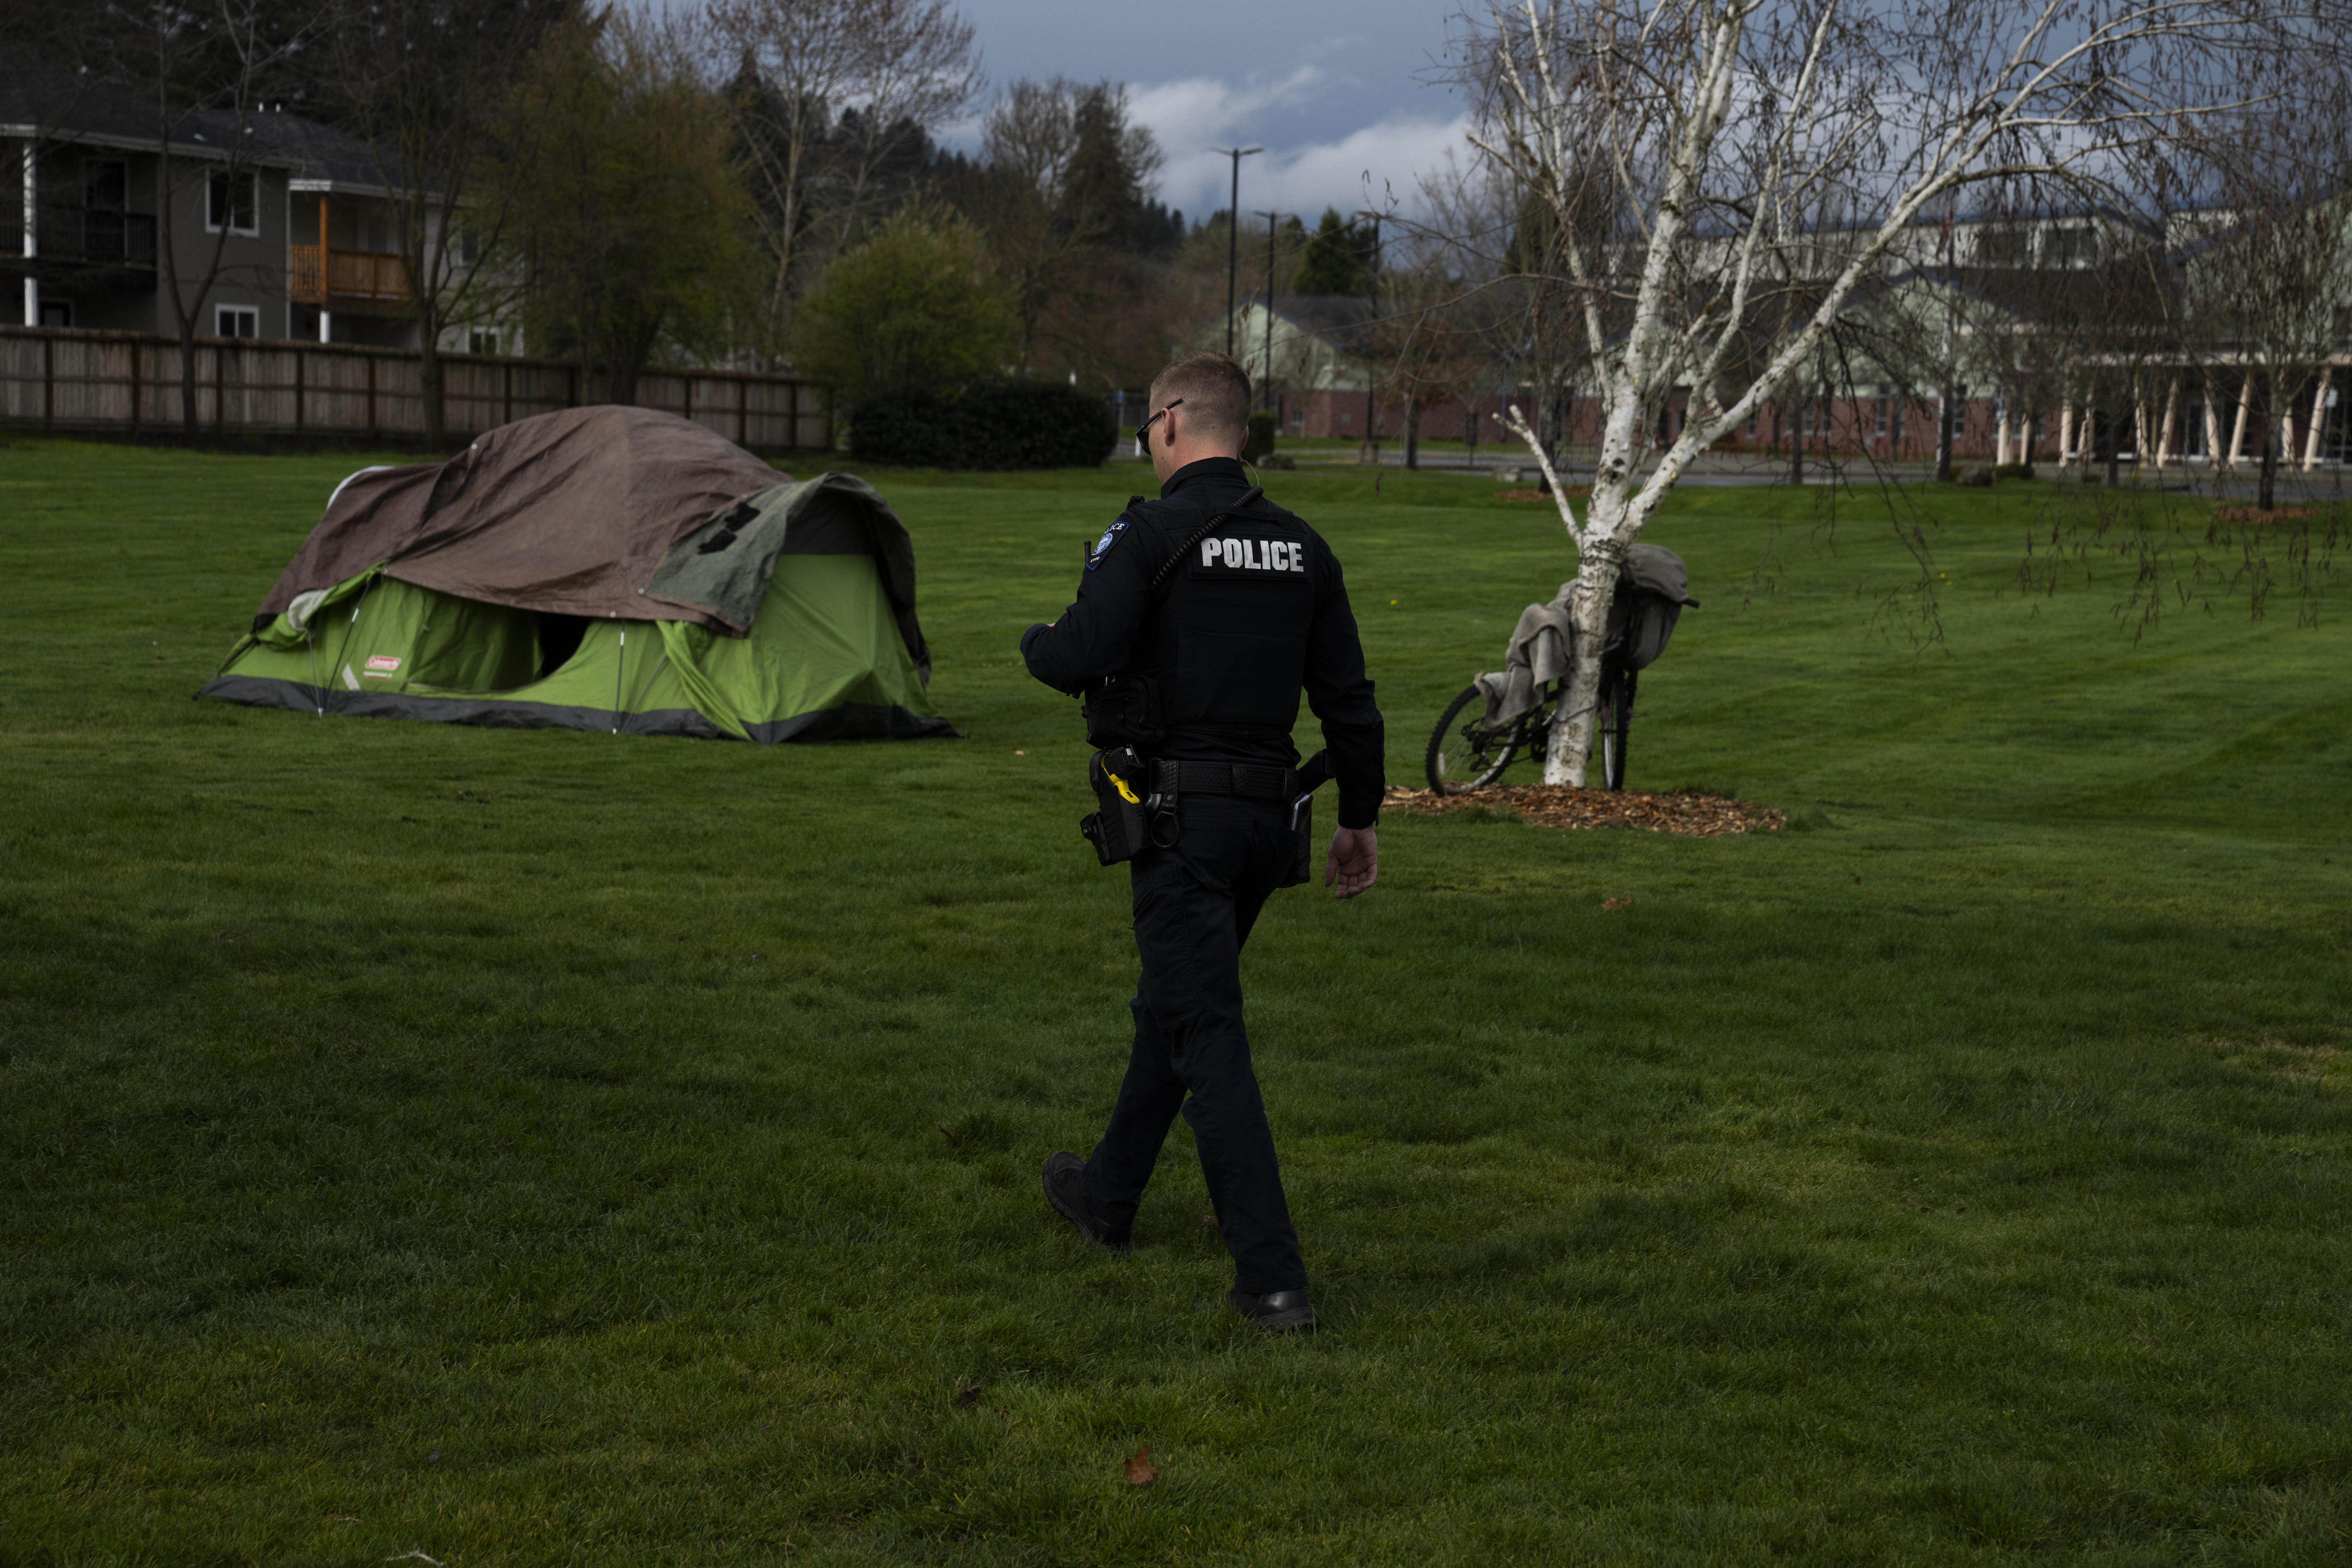 supreme court to weigh bans targeting homeless encampments